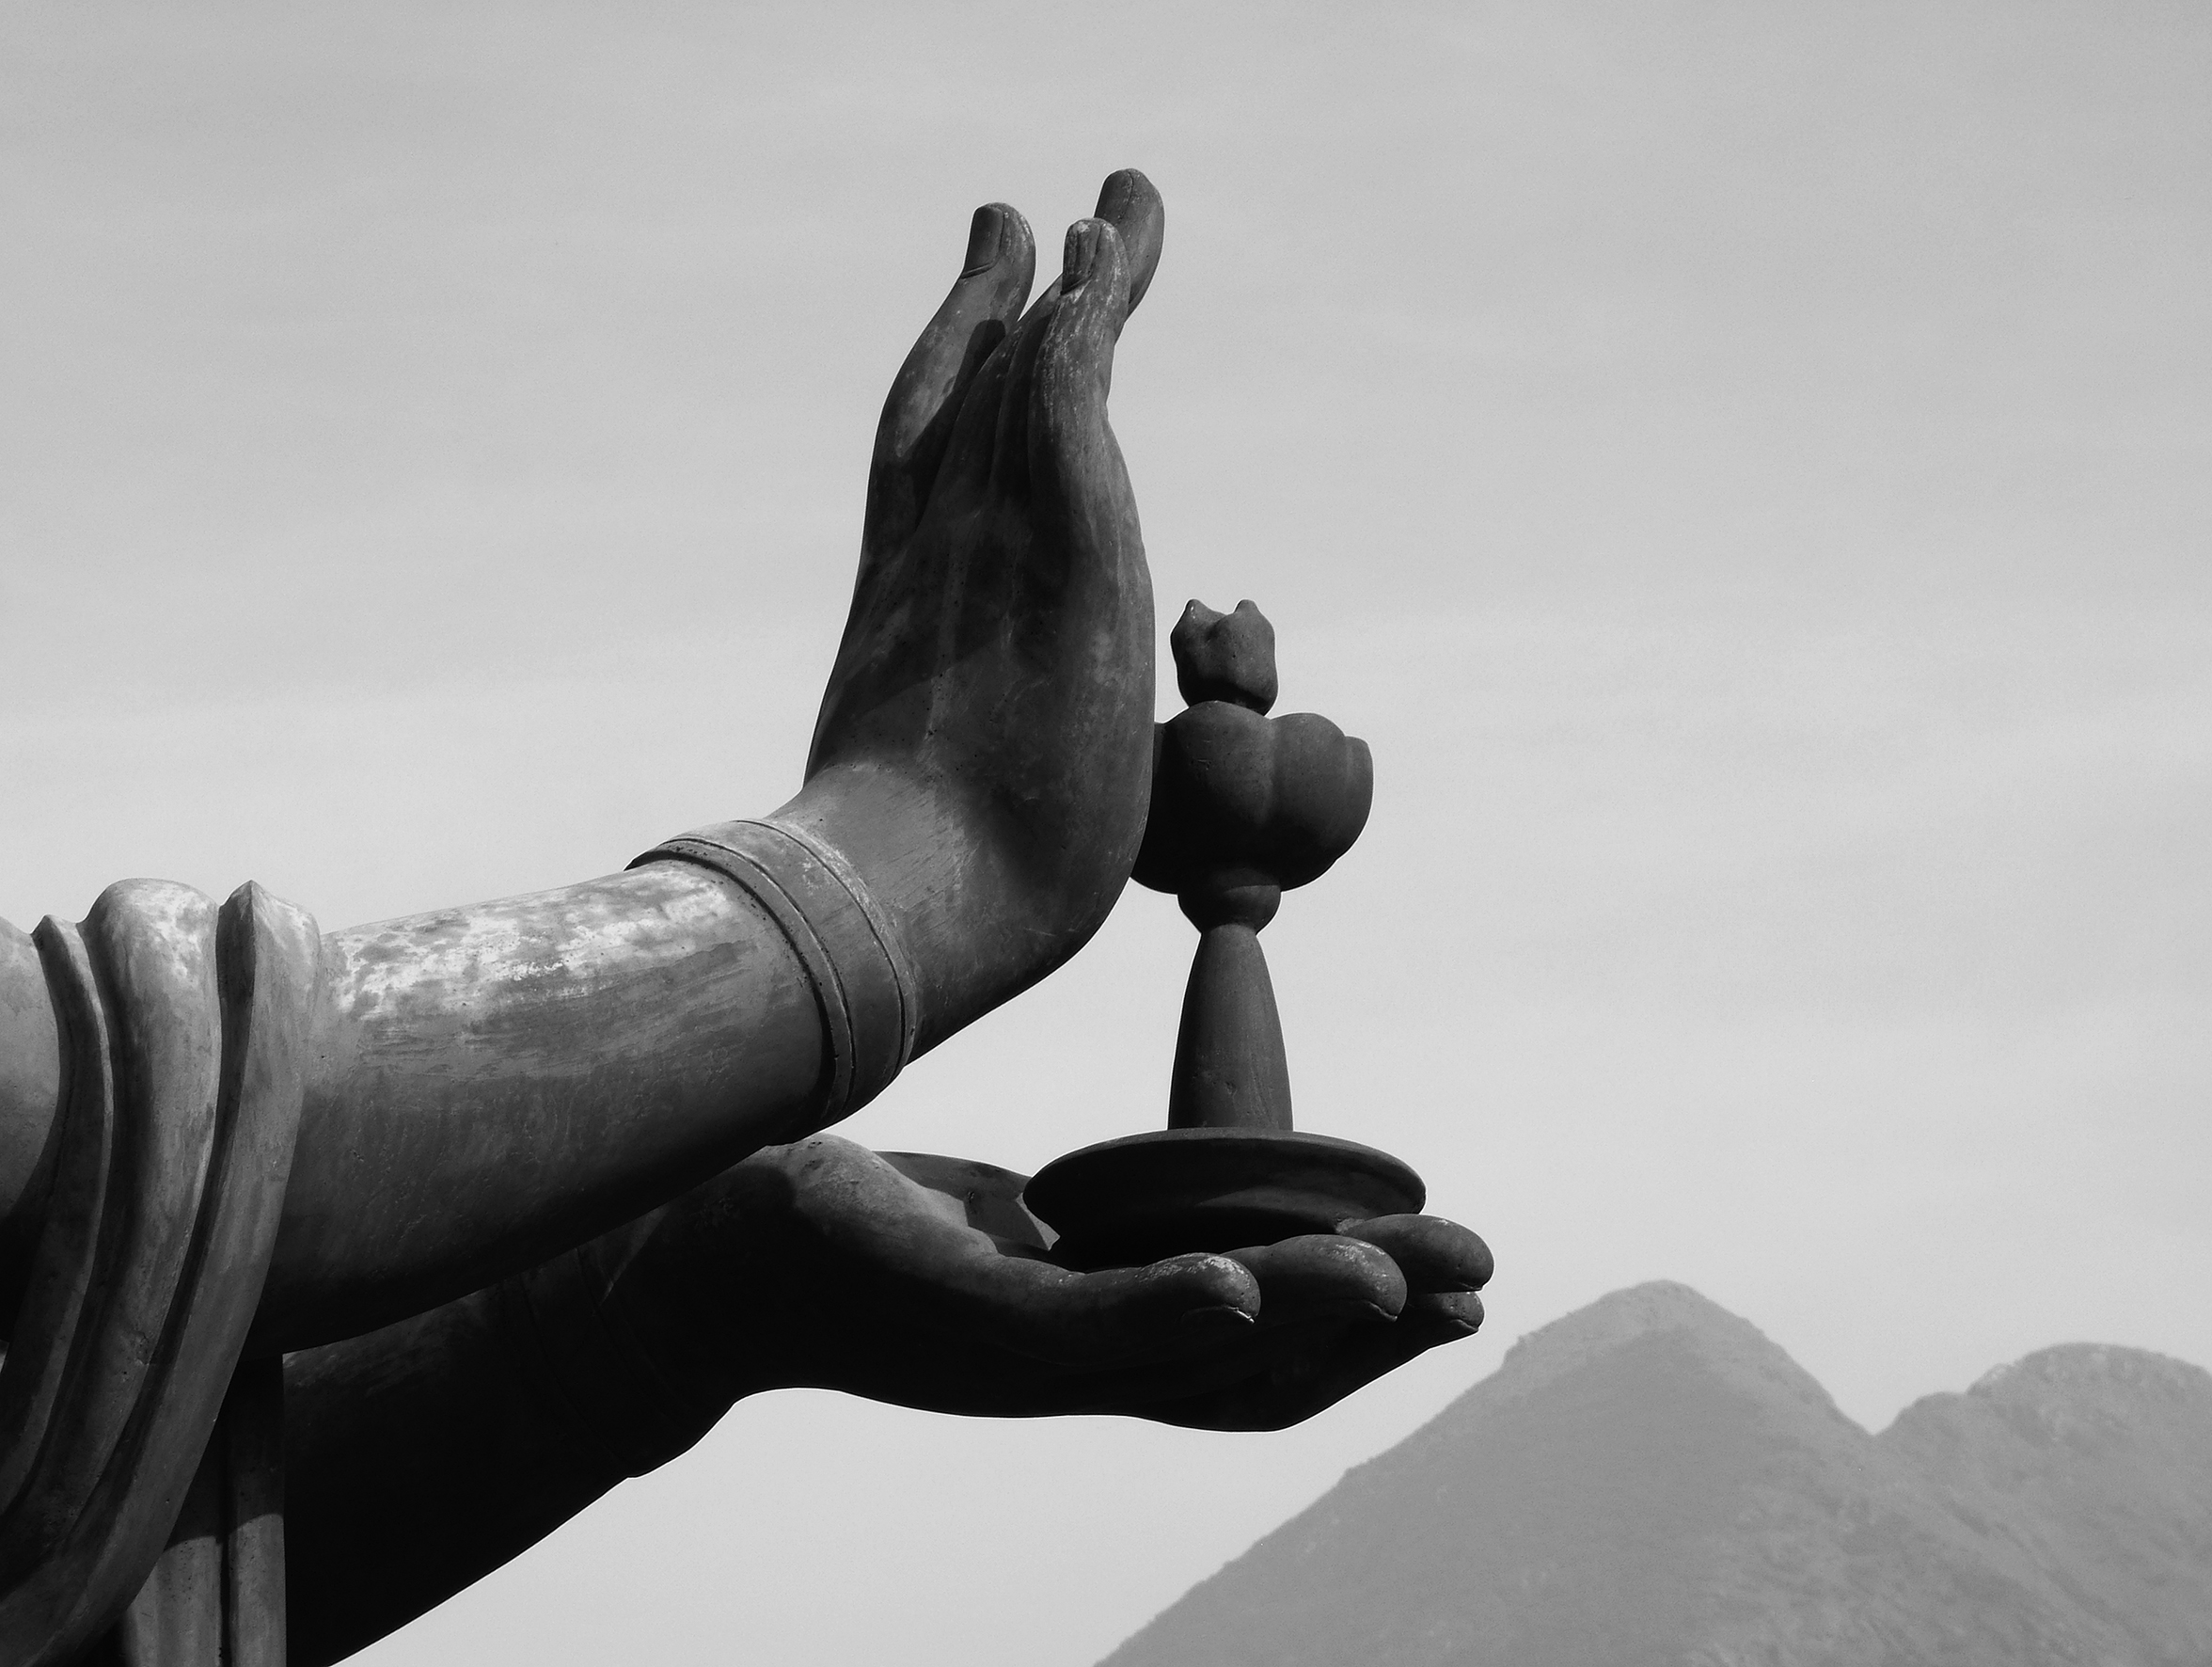 A close-up of a statue’s hands holding what appears to be a lotus. Mountaintops are just peeking from the bottom-right corner of the image.